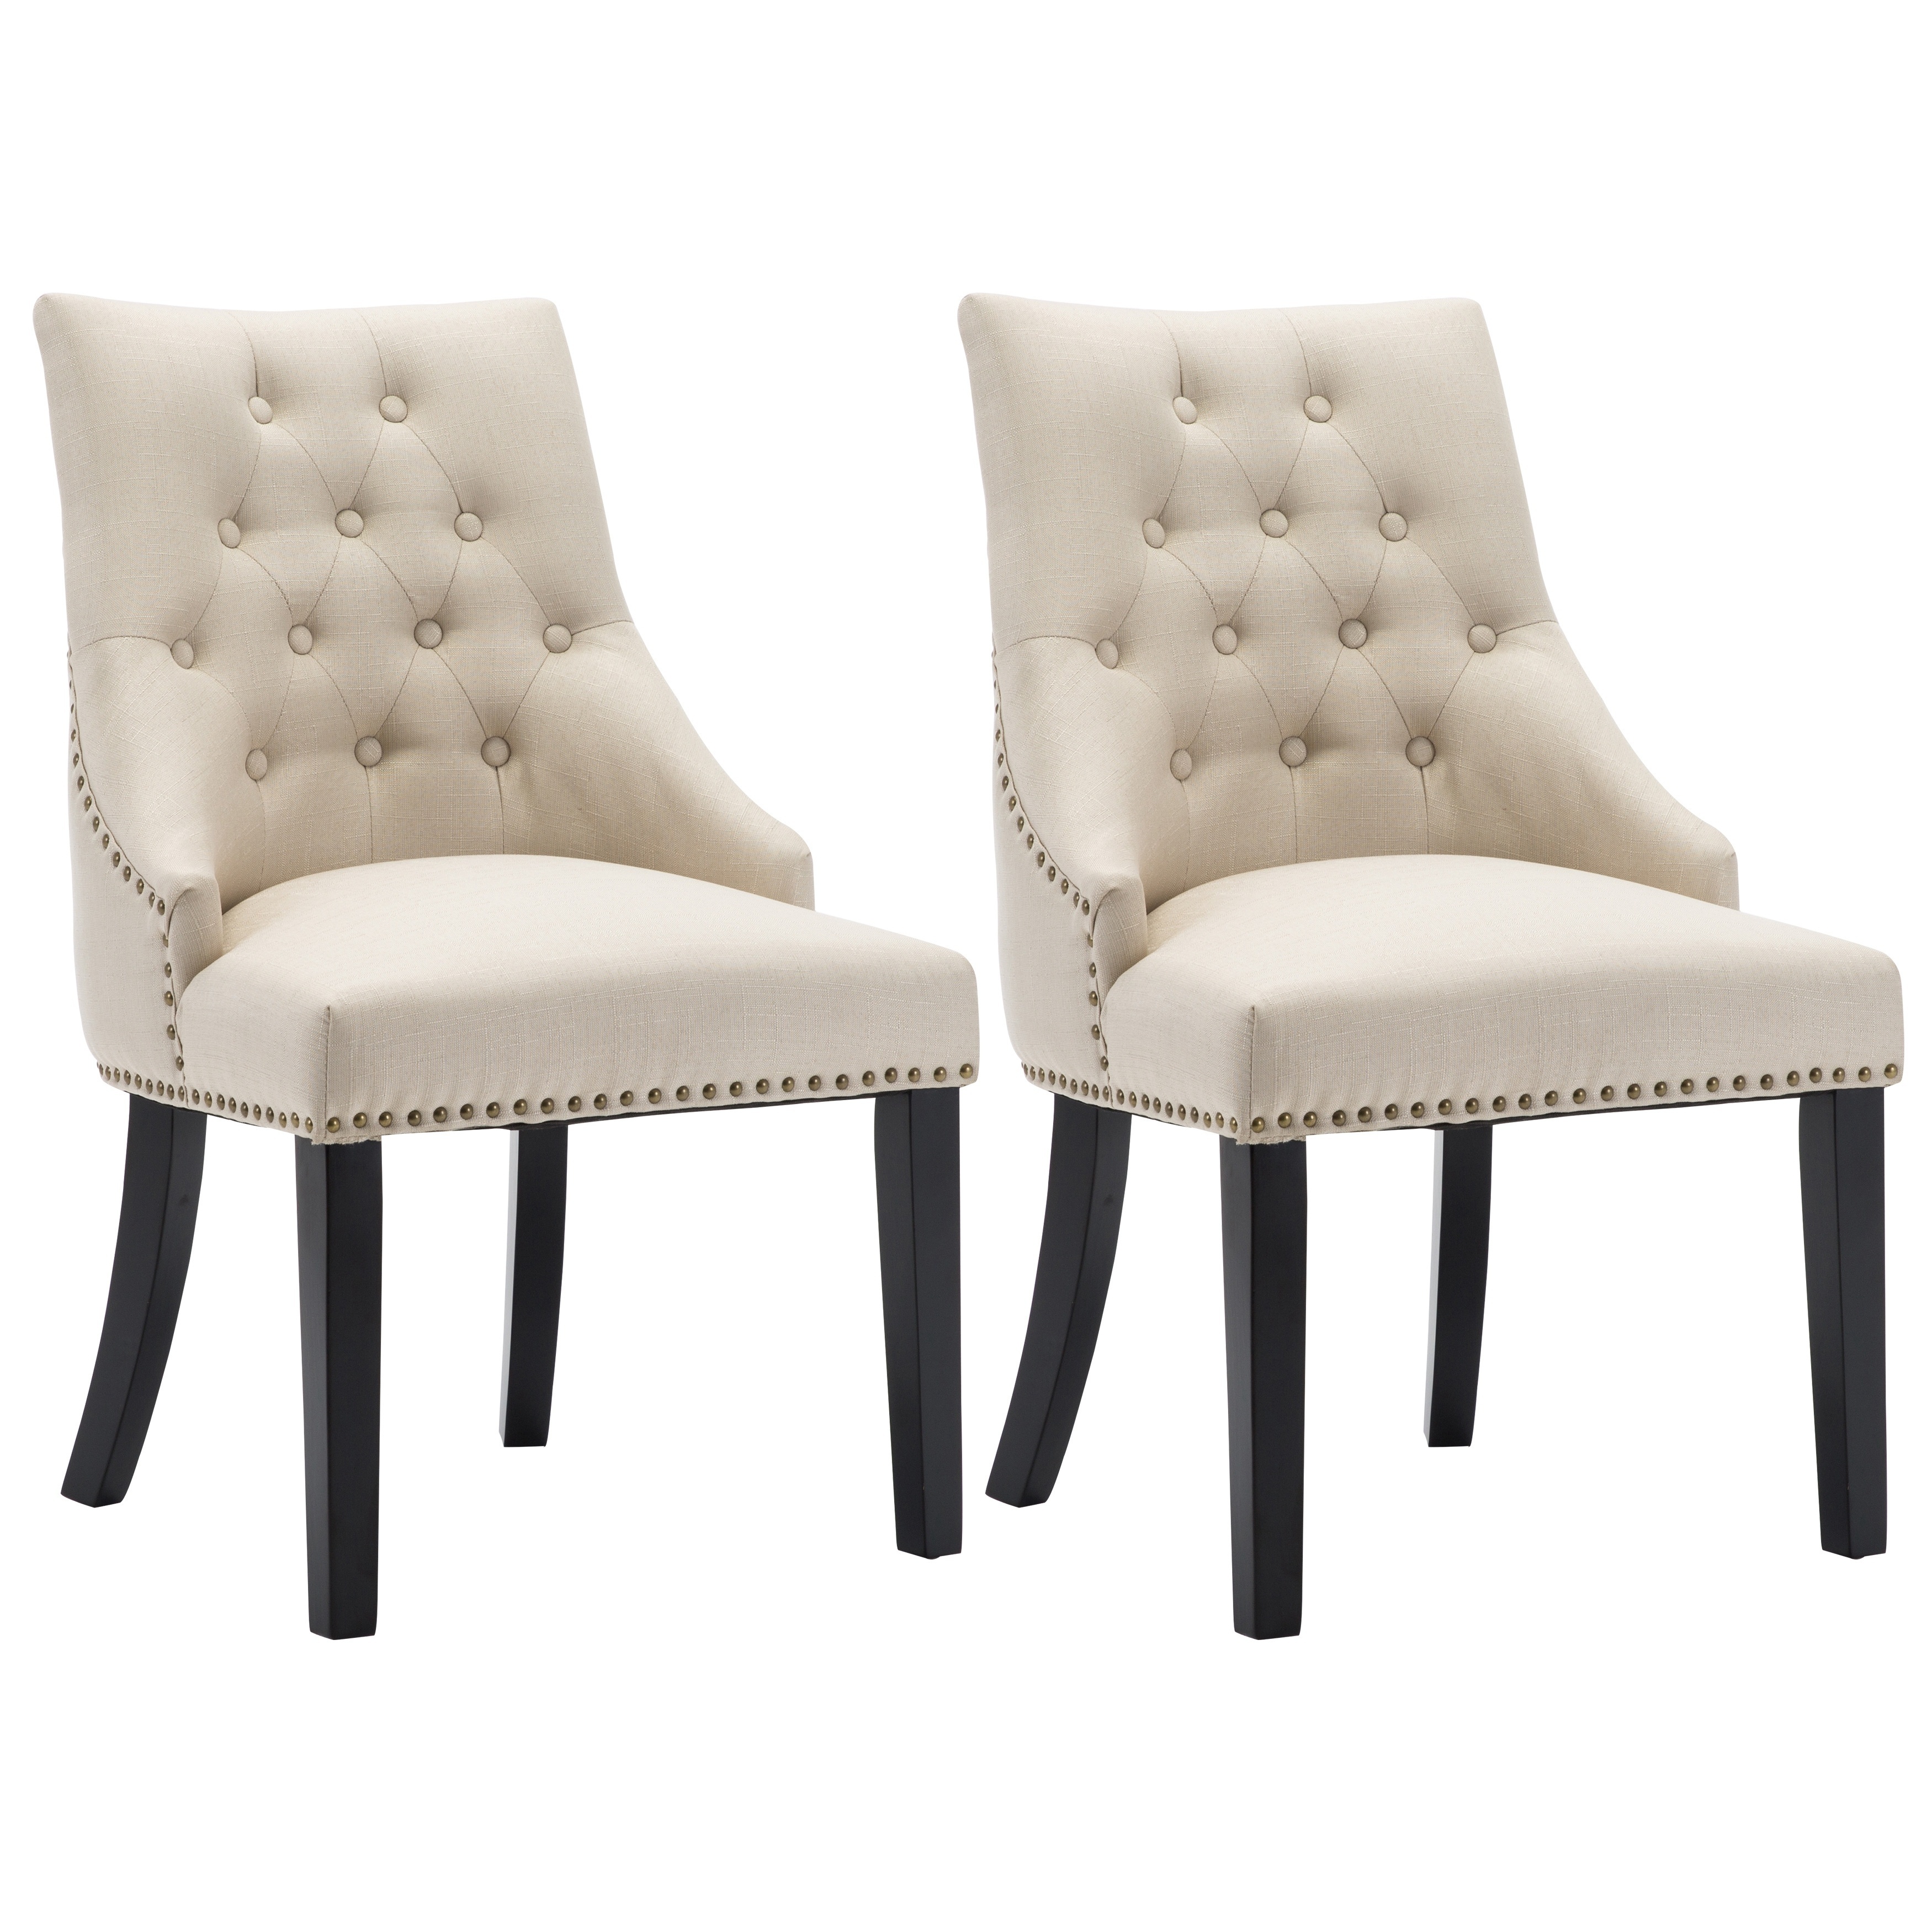 

Dining Chairs Set Of 2, Modern Upholstered Fabric Dining Room Chair With Tufted Button Back, Solid Wood Legs, Nailed Trim (beige)